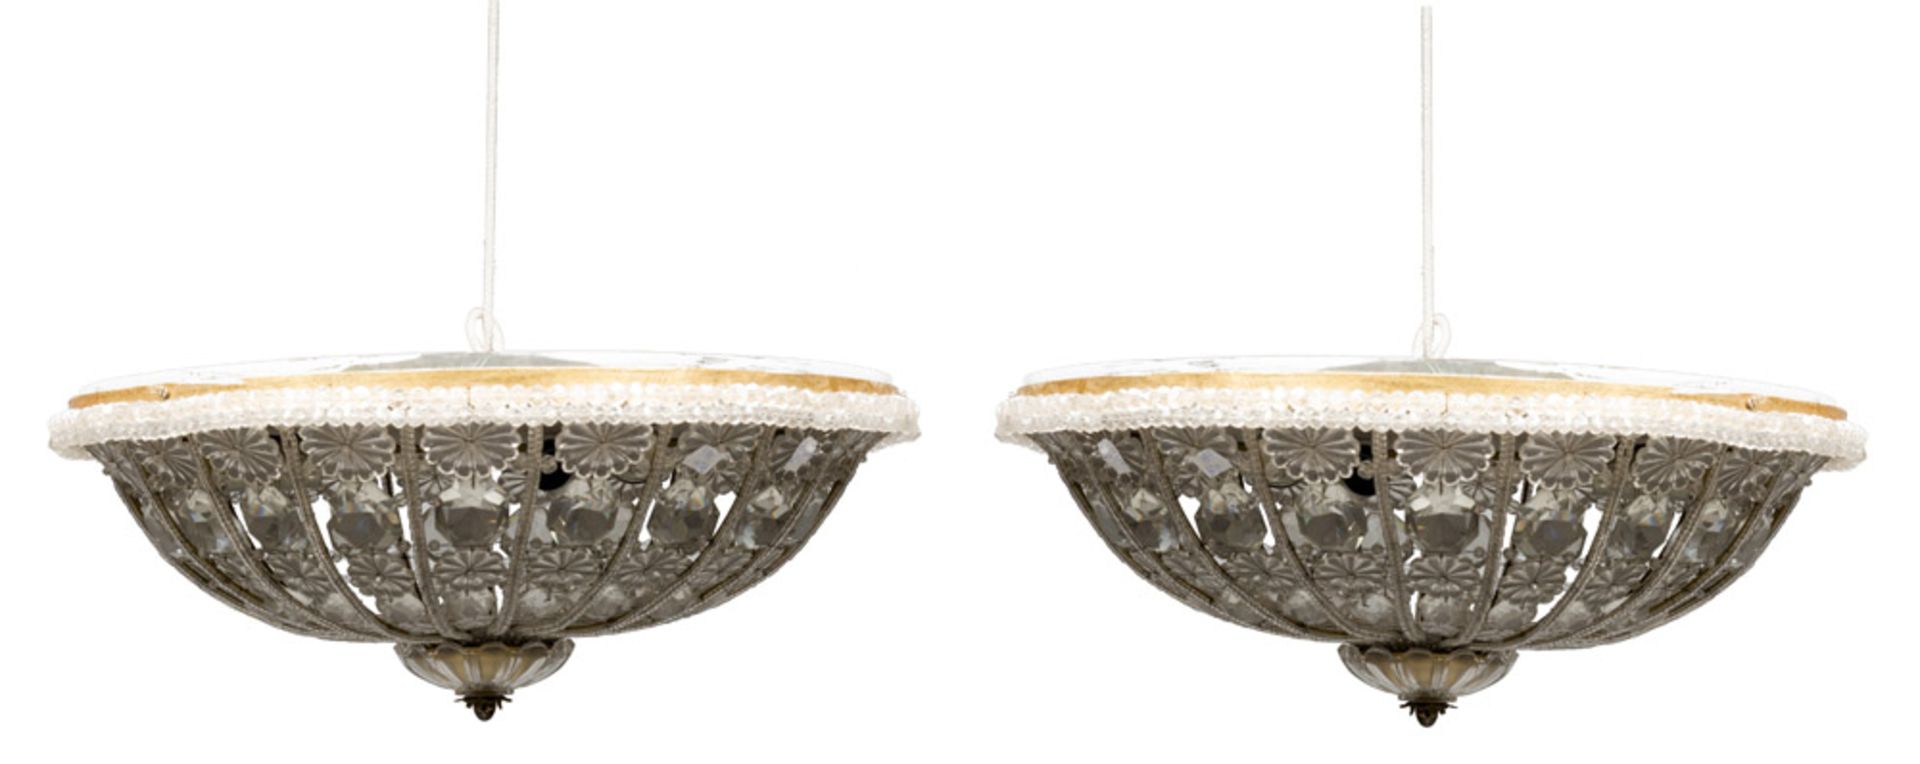 A PAIR OF CEILING LIGHTS, EARLY 20TH CENTURY cap with rows of prisms and daisies in grinded glasses.